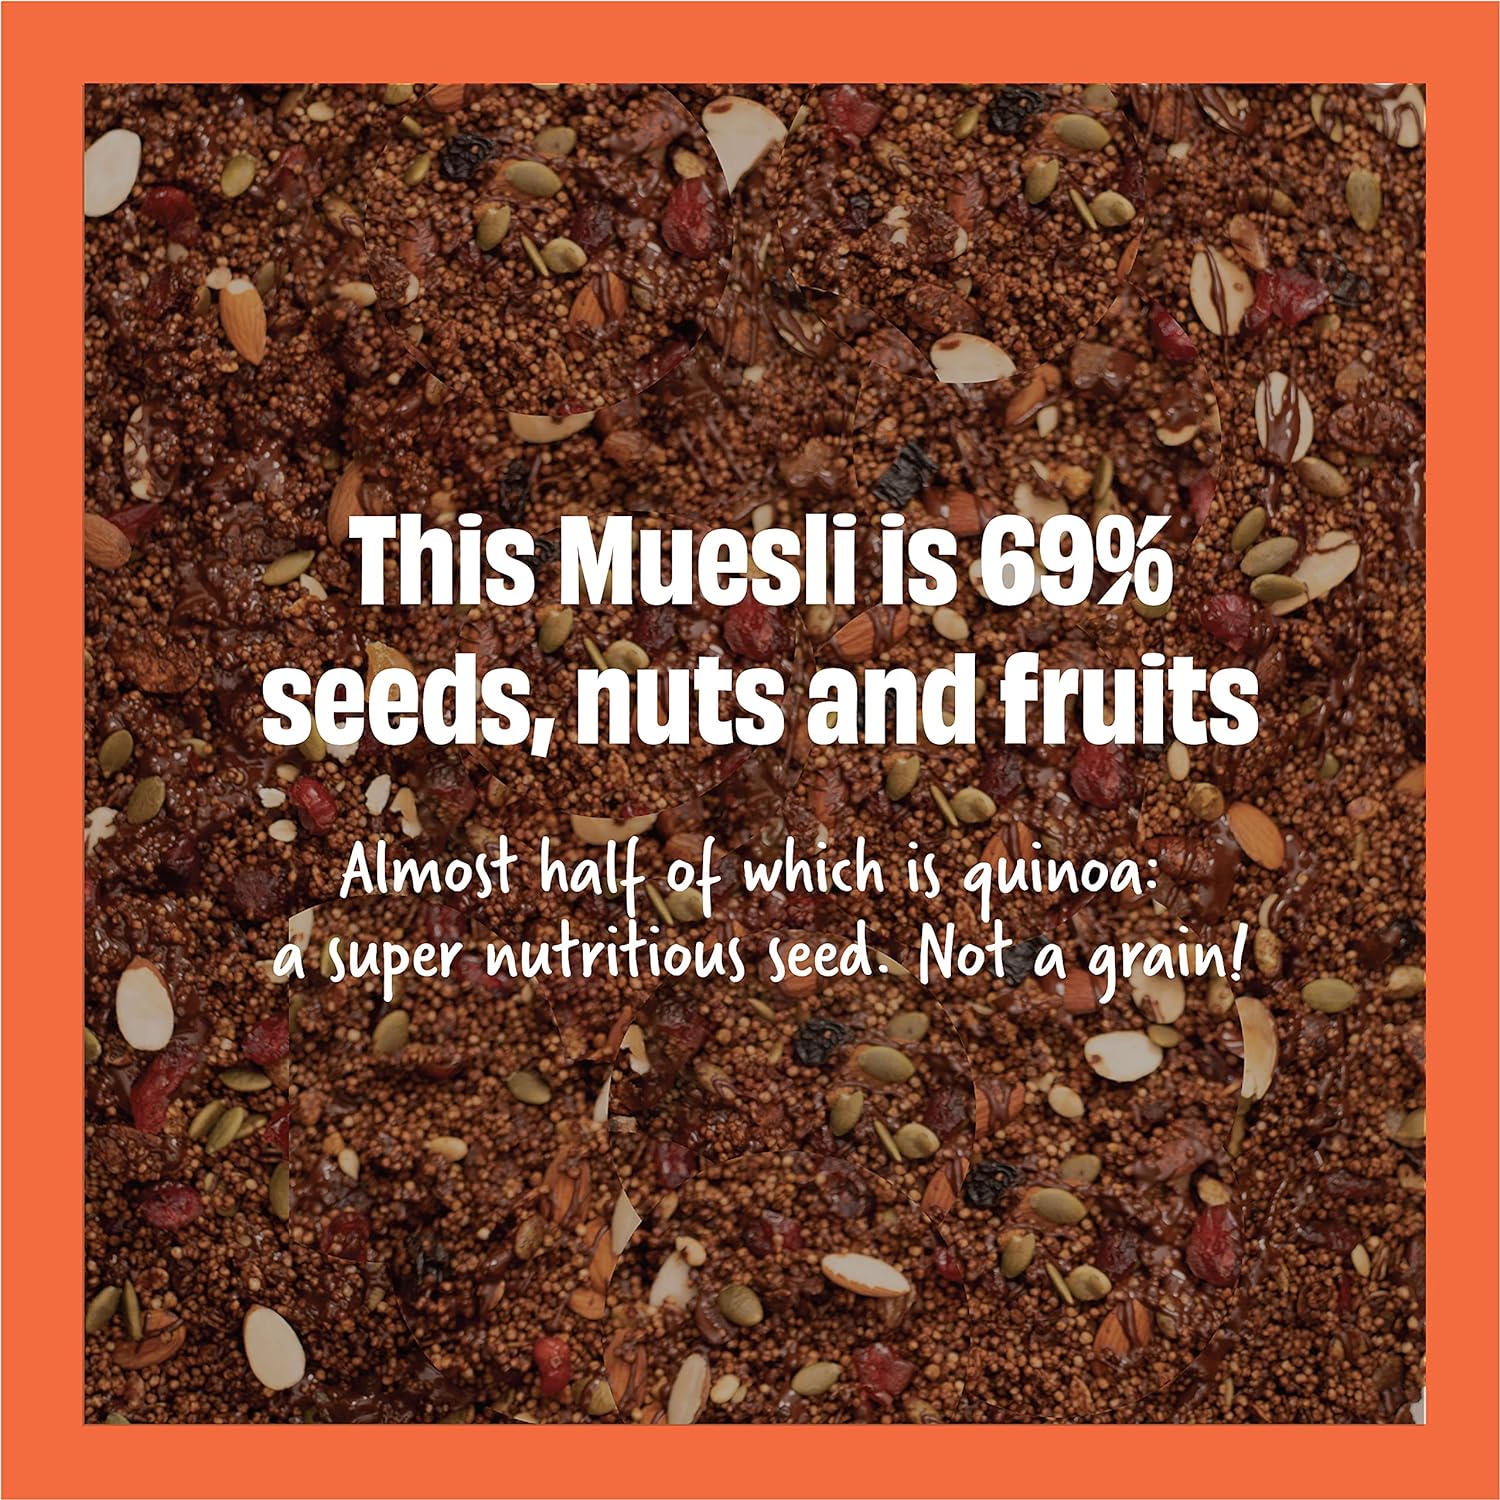 The Whole Truth - Breakfast Muesli | Quinoa Choco Crunch Muesli | 320grams | Vegan | Dairy-free | No Artificial Sweeteners | No Added Flavours | No Gluten or Soy | Nutritious Snacks